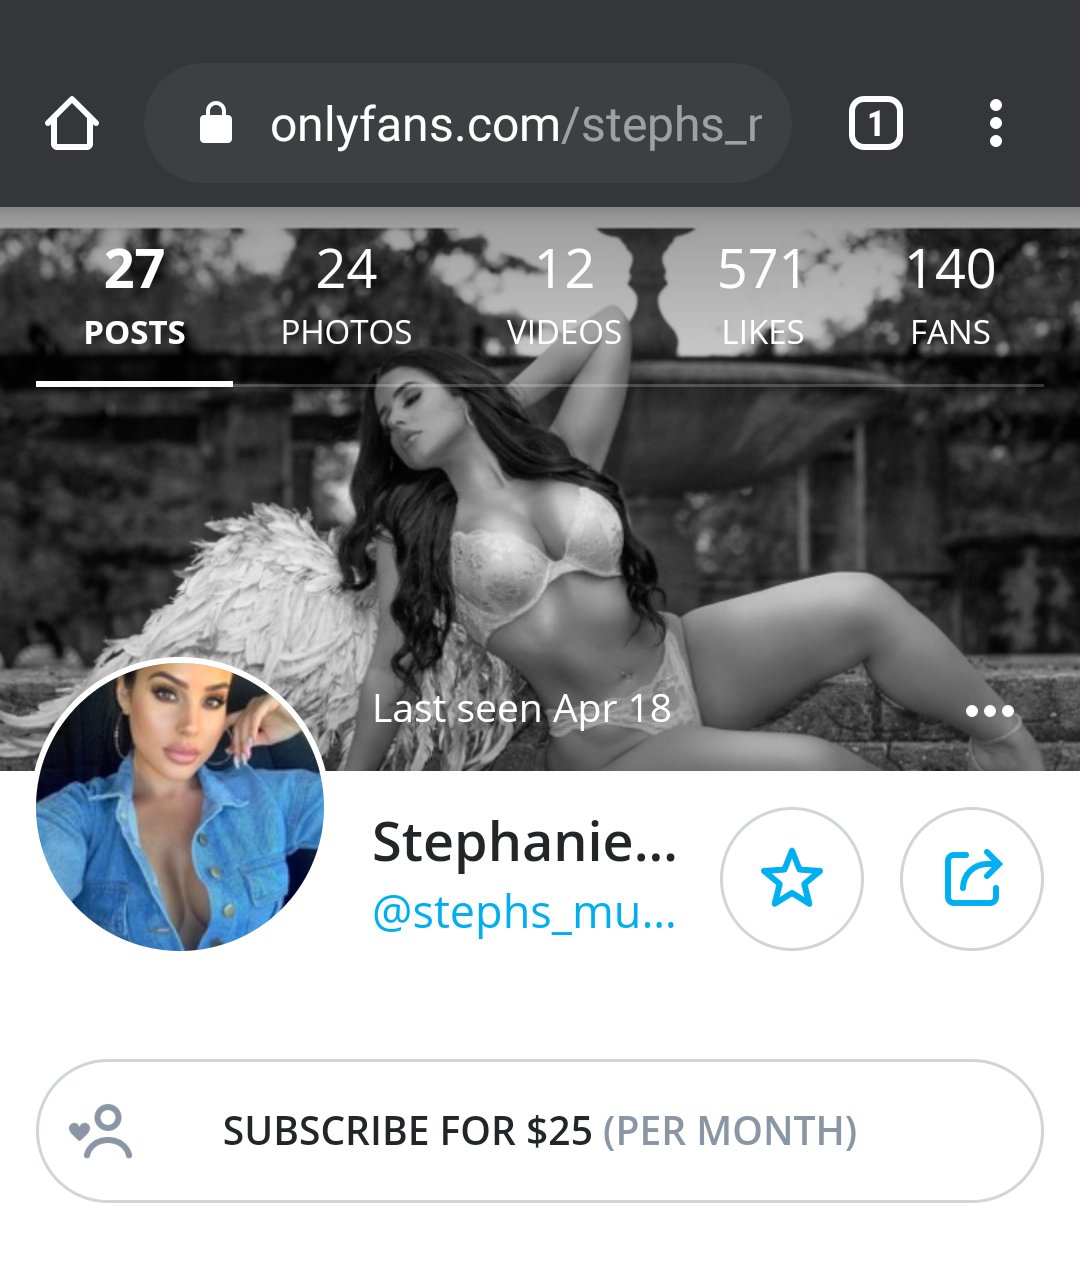 Stephanie only fans